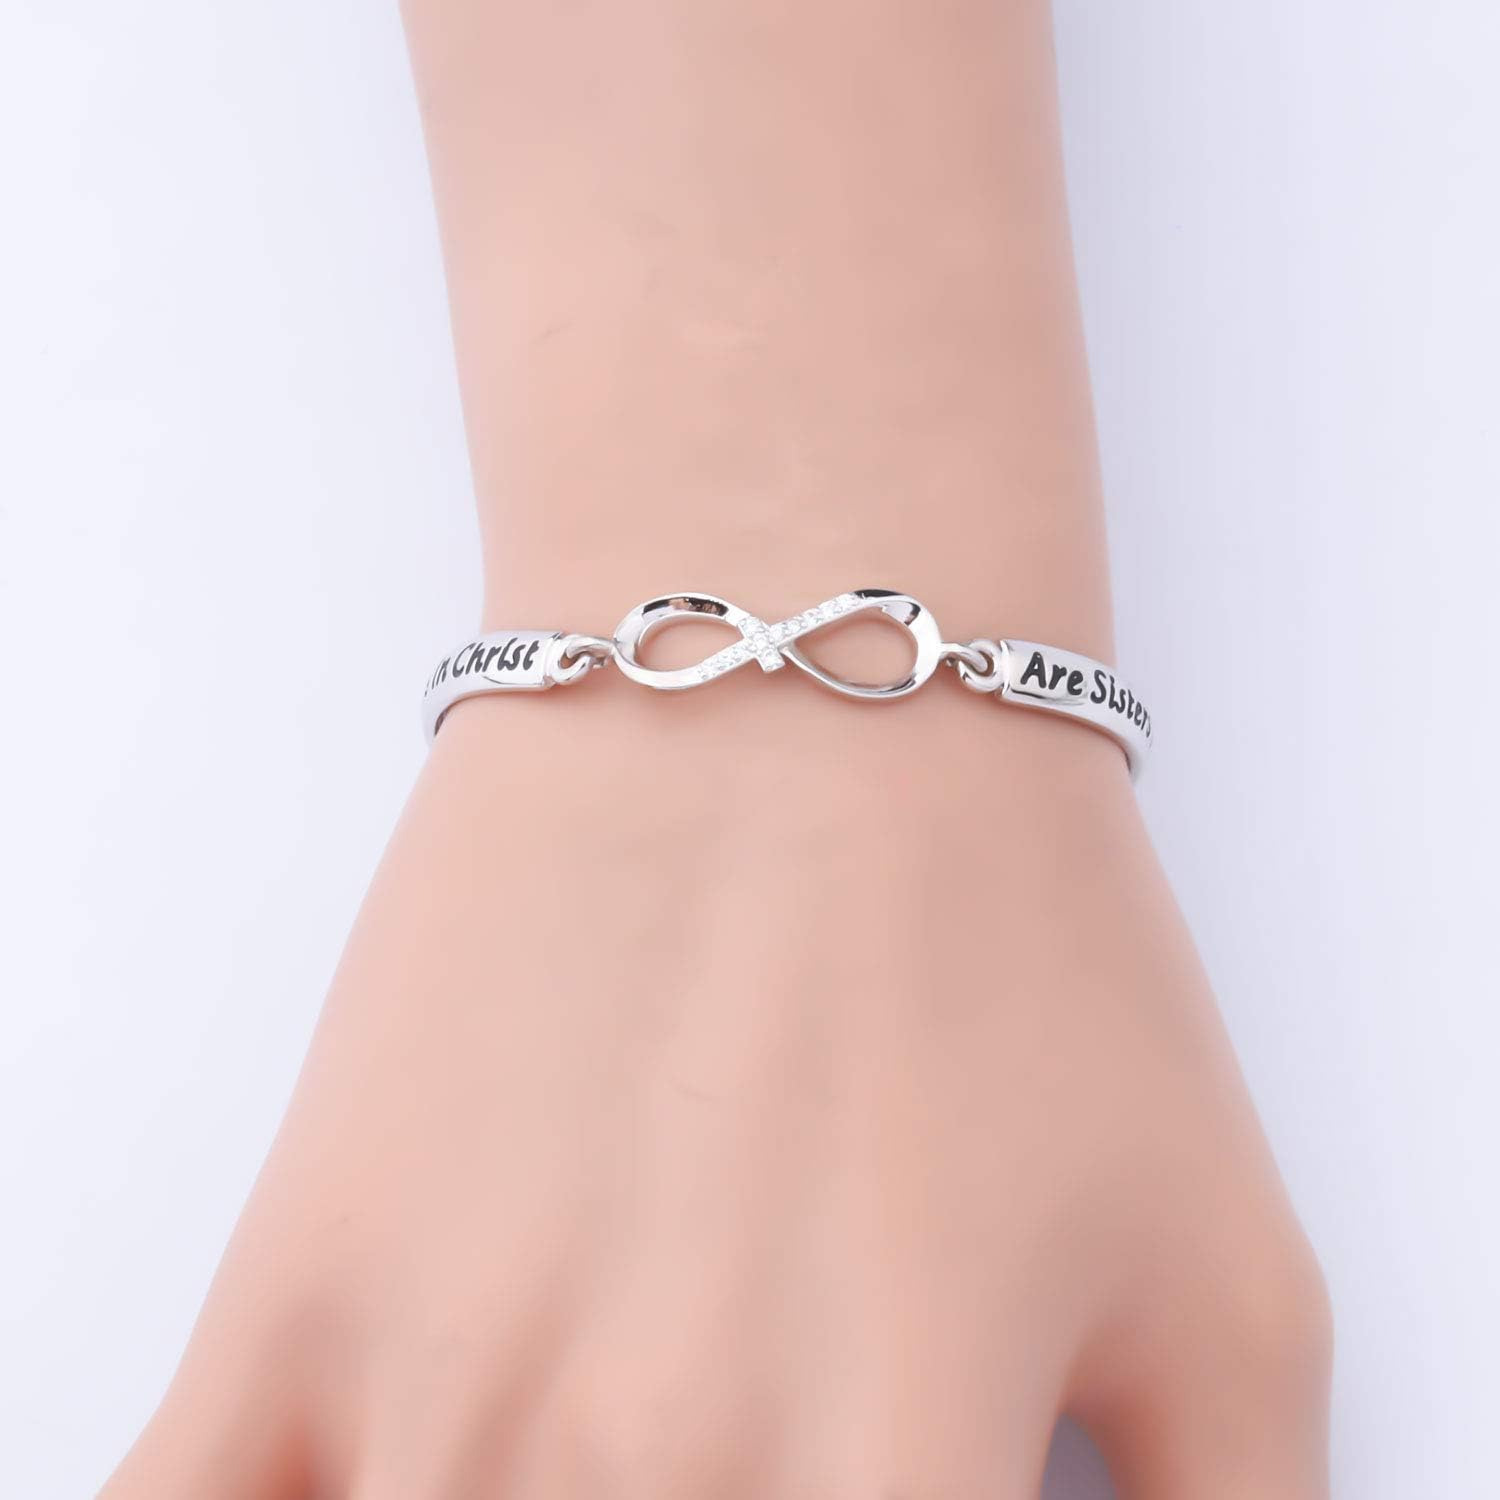 Gifts for Sisters in Christ: Sister in Christ Bracelet, NEW